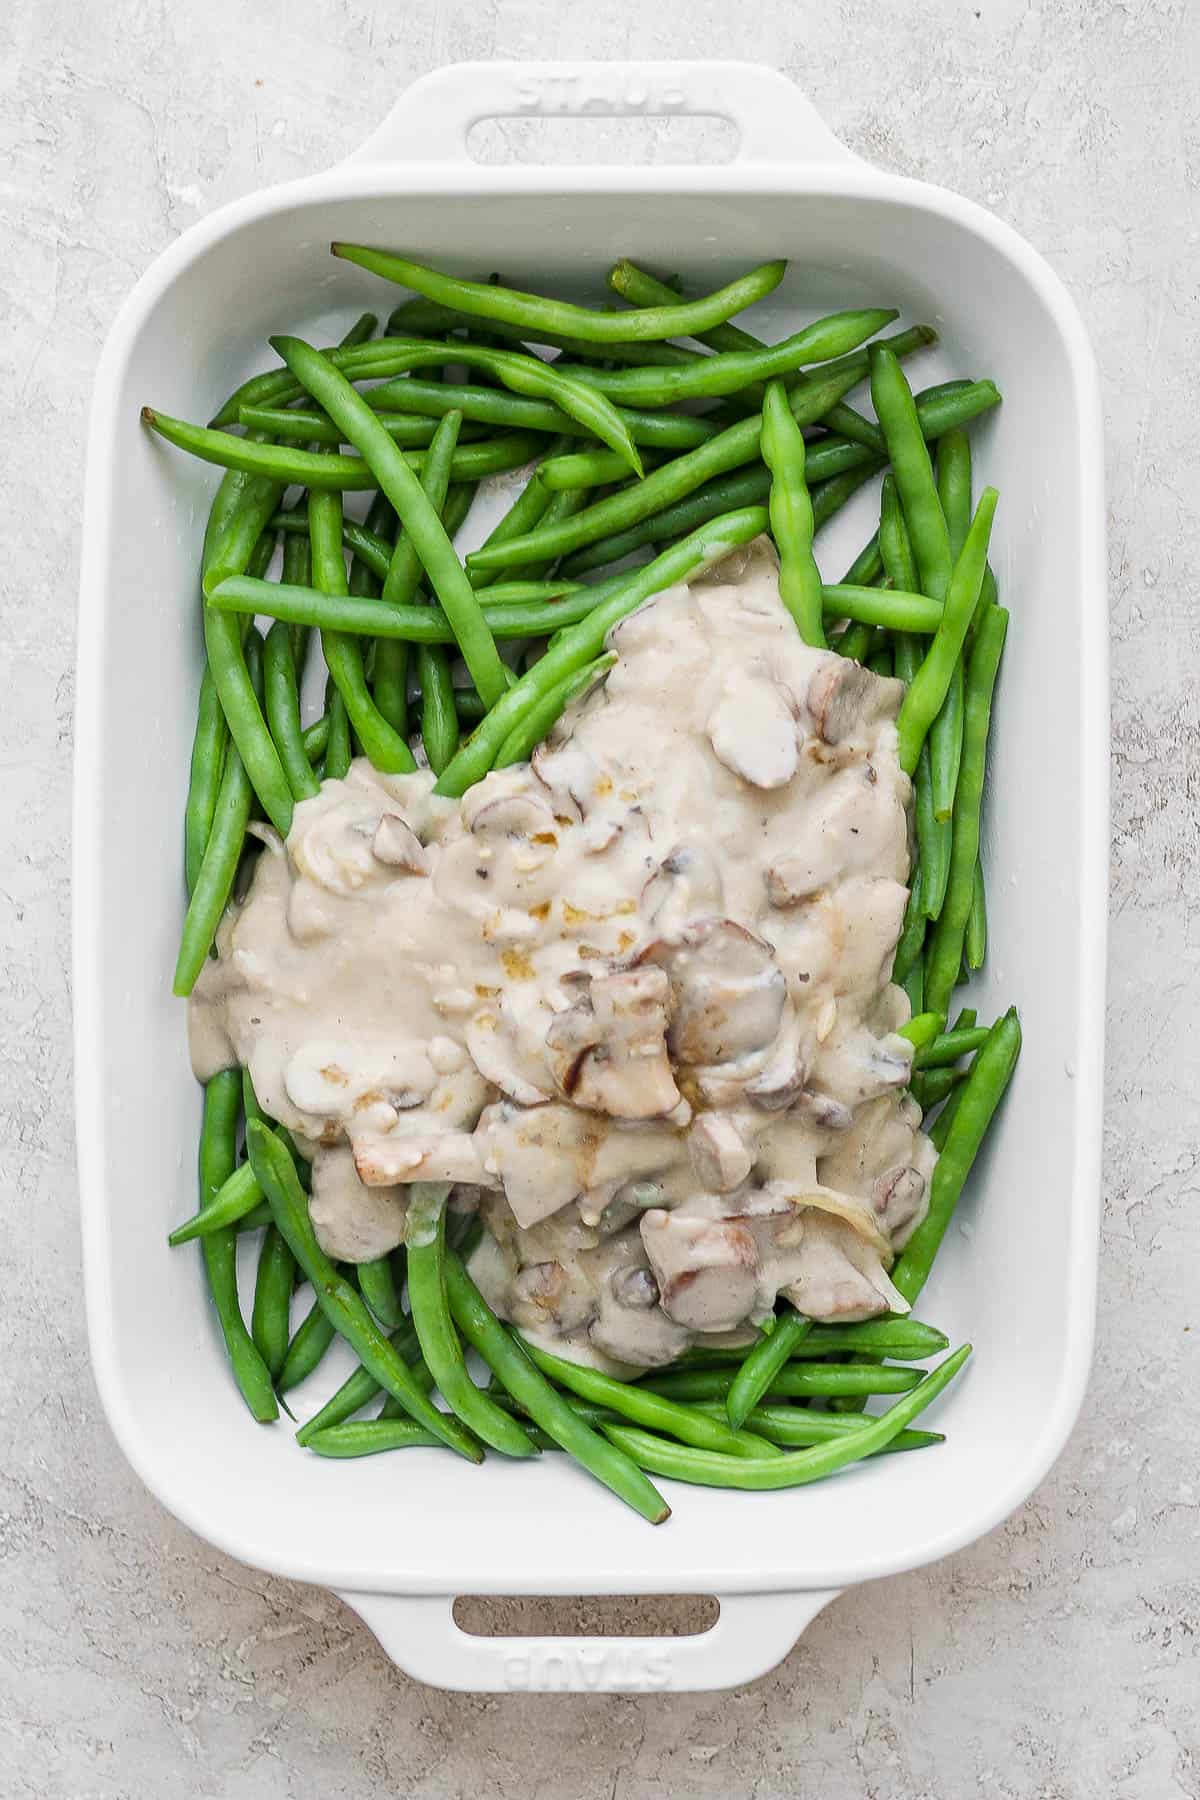 Mushroom sauce poured over the blanched green beans in a baking dish.